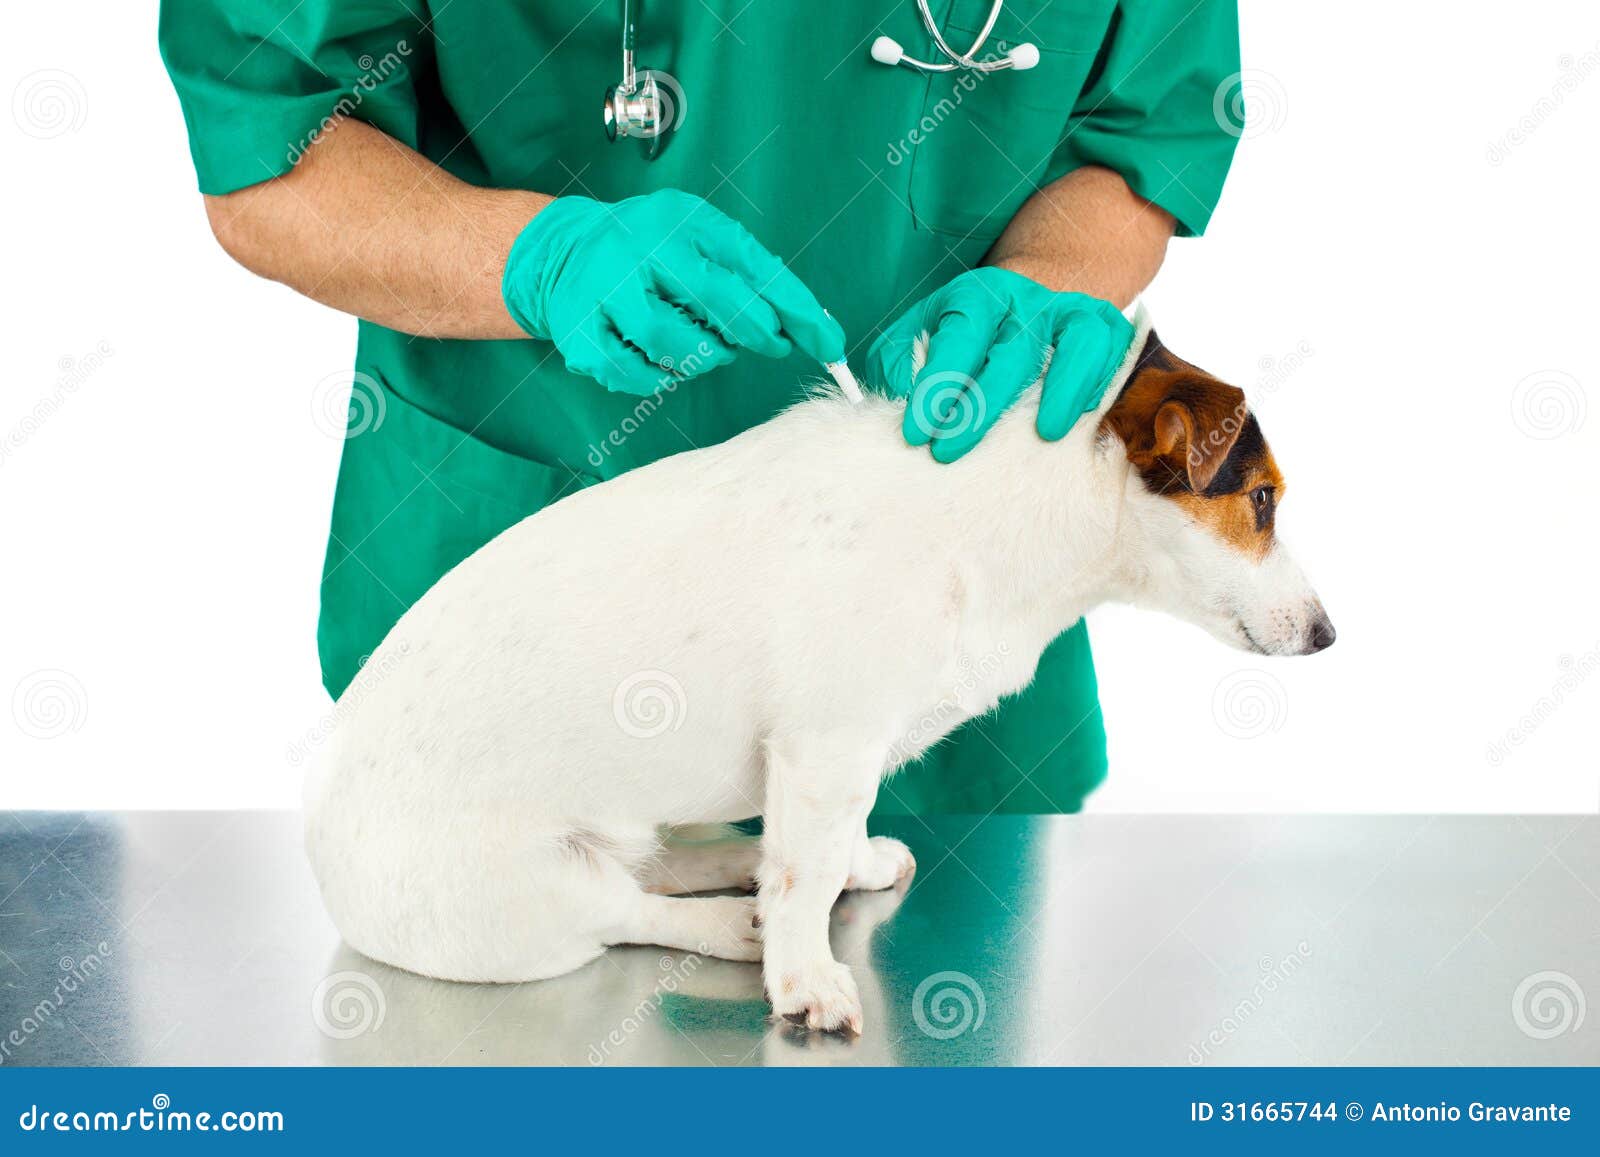 antiparasitic cure for dog